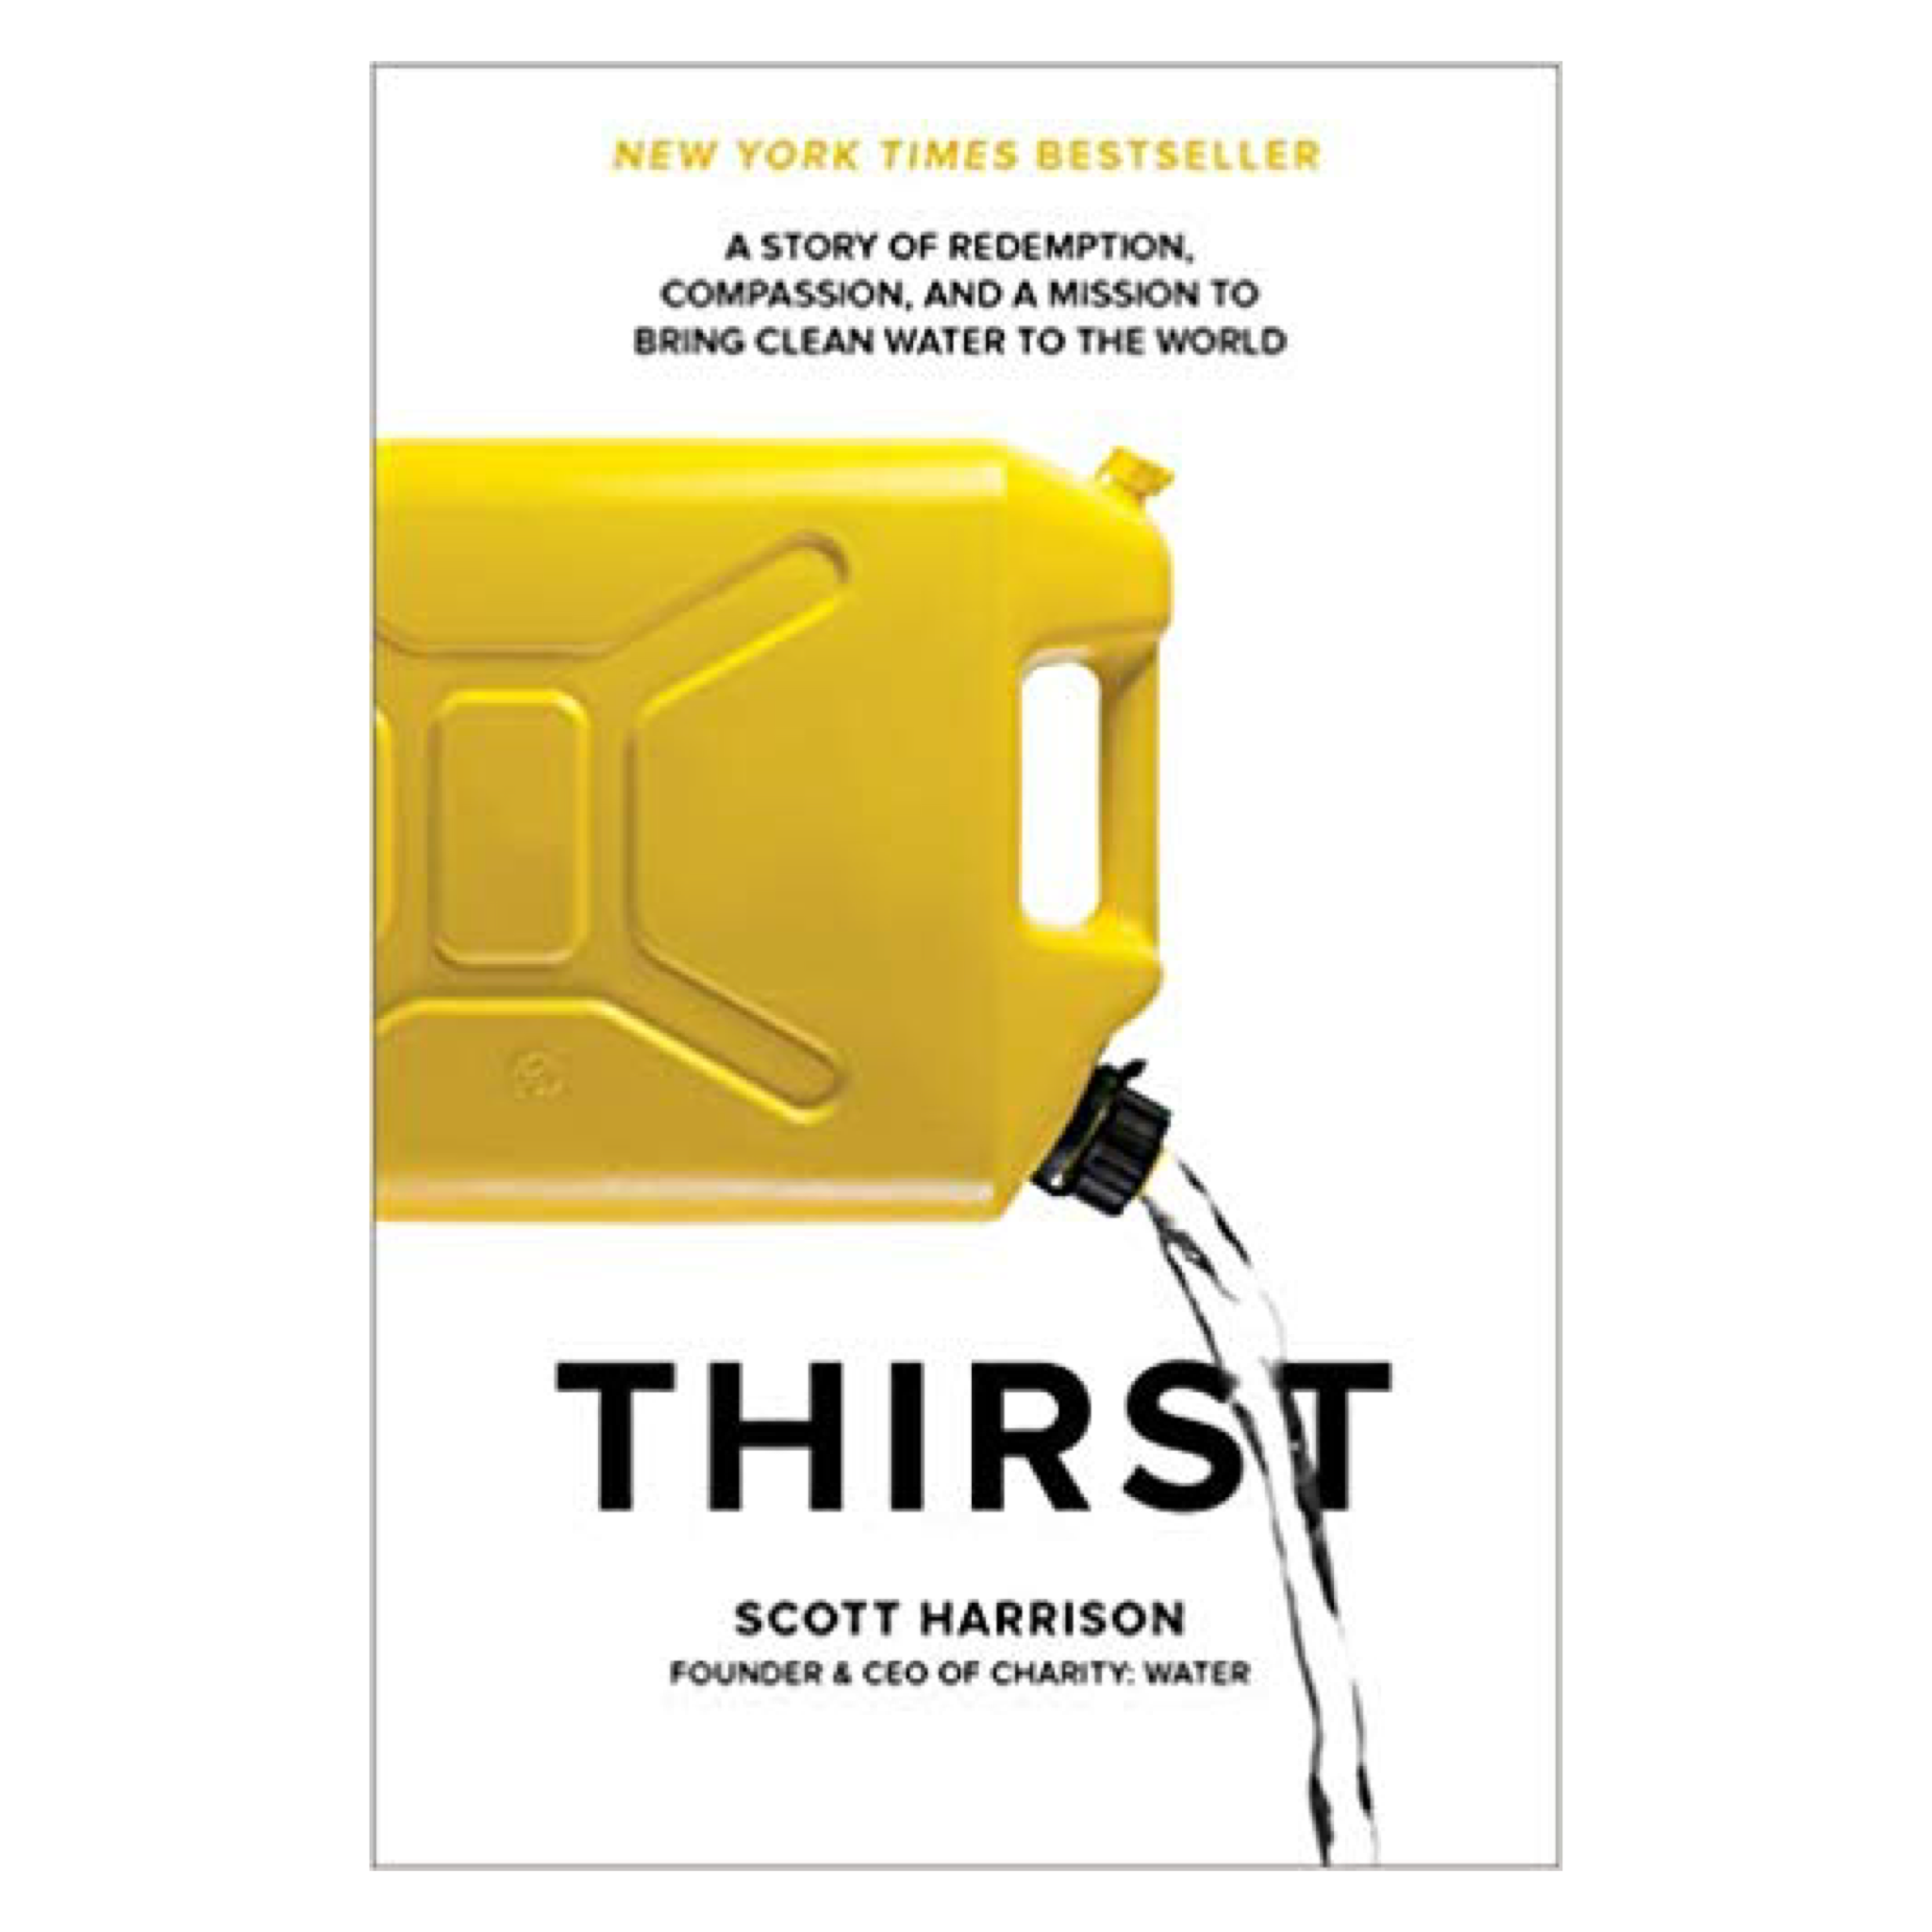 Thirst - A Story of Redemption by Scott Harrison